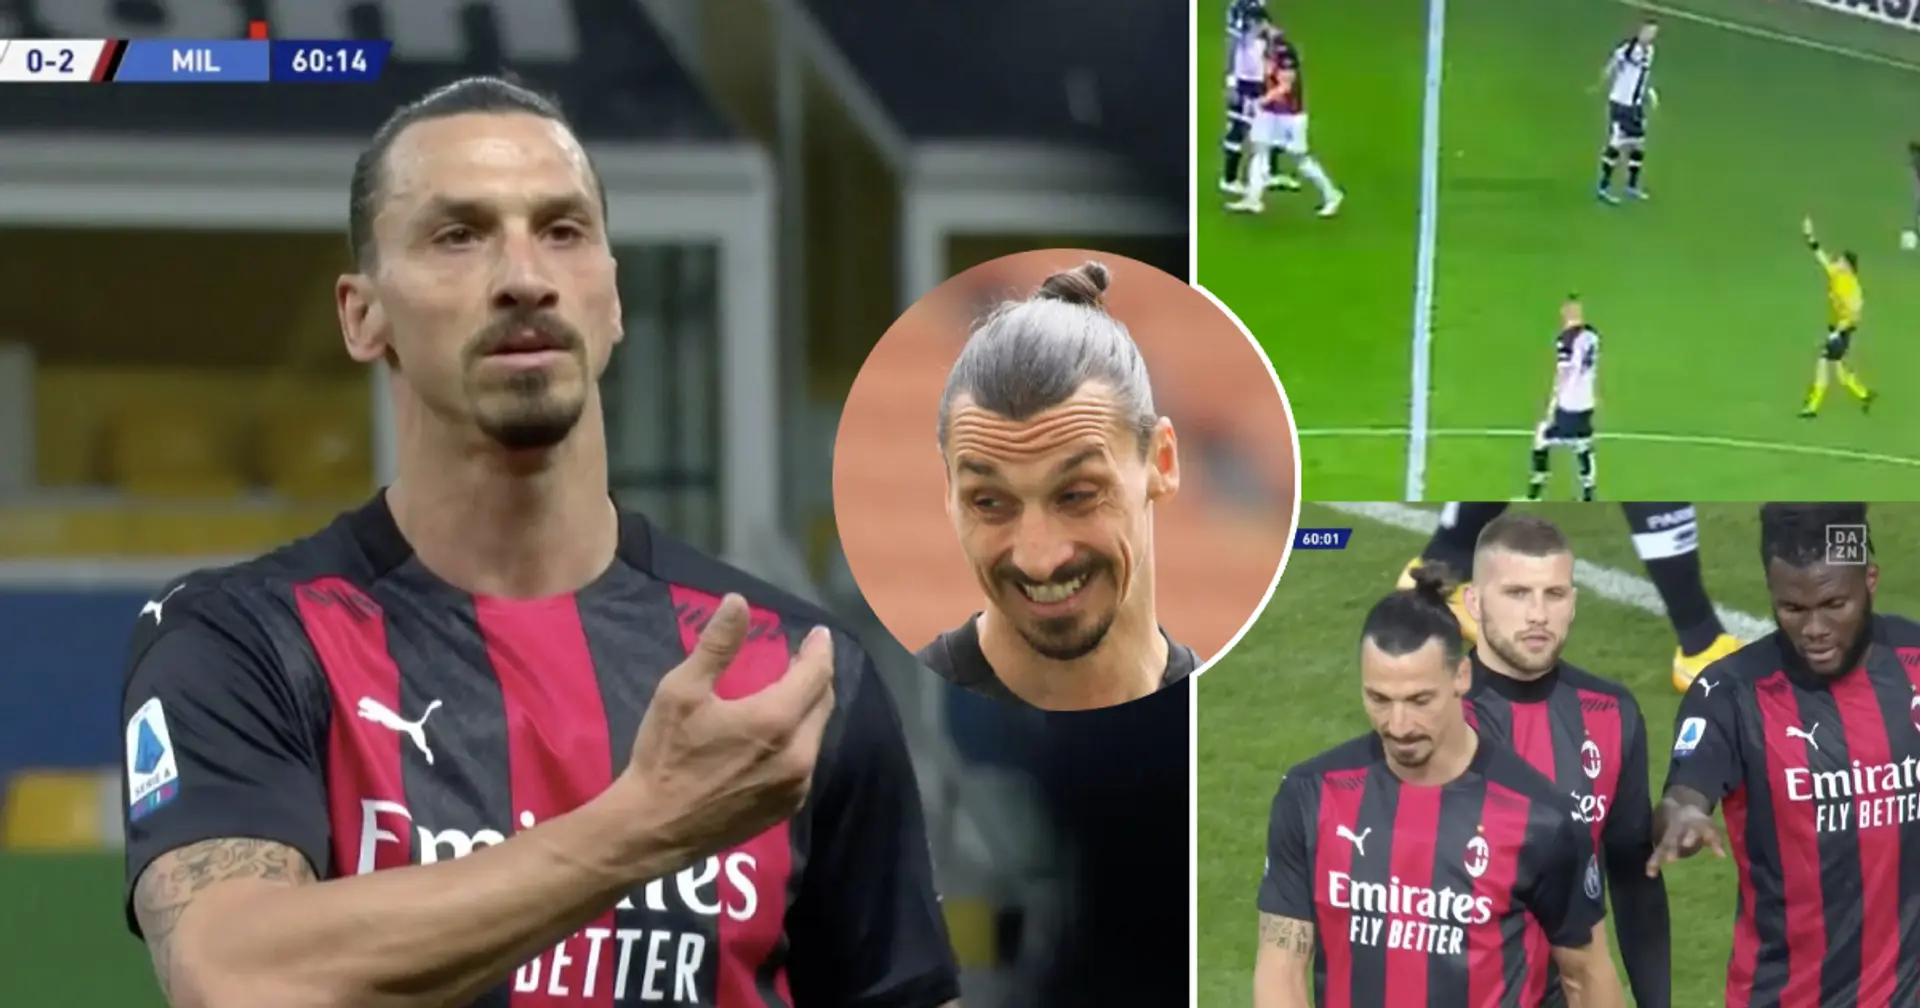 Words that led to Zlatan Ibrahimovic's bizarre red card revealed